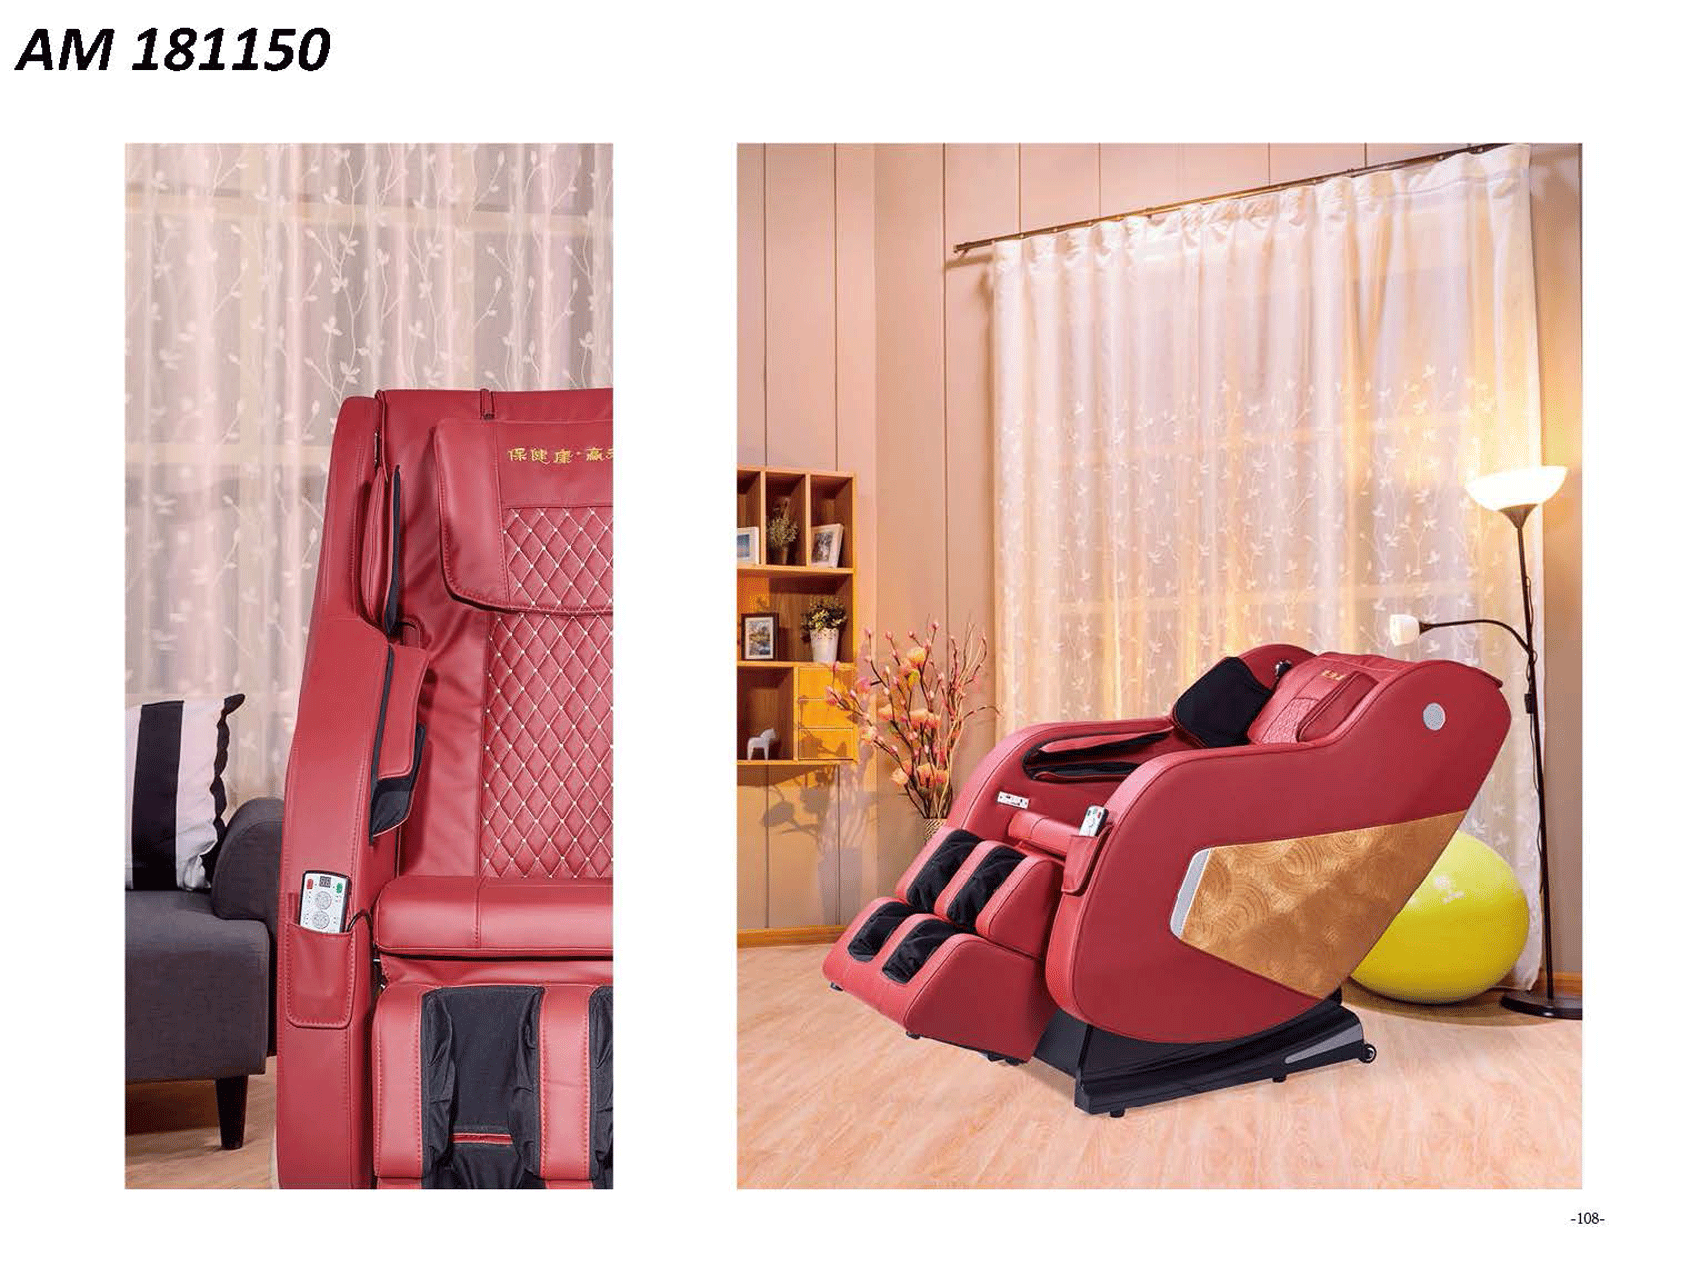 Living Room Furniture Sleepers Sofas Loveseats and Chairs AM 181150 Massage Chair